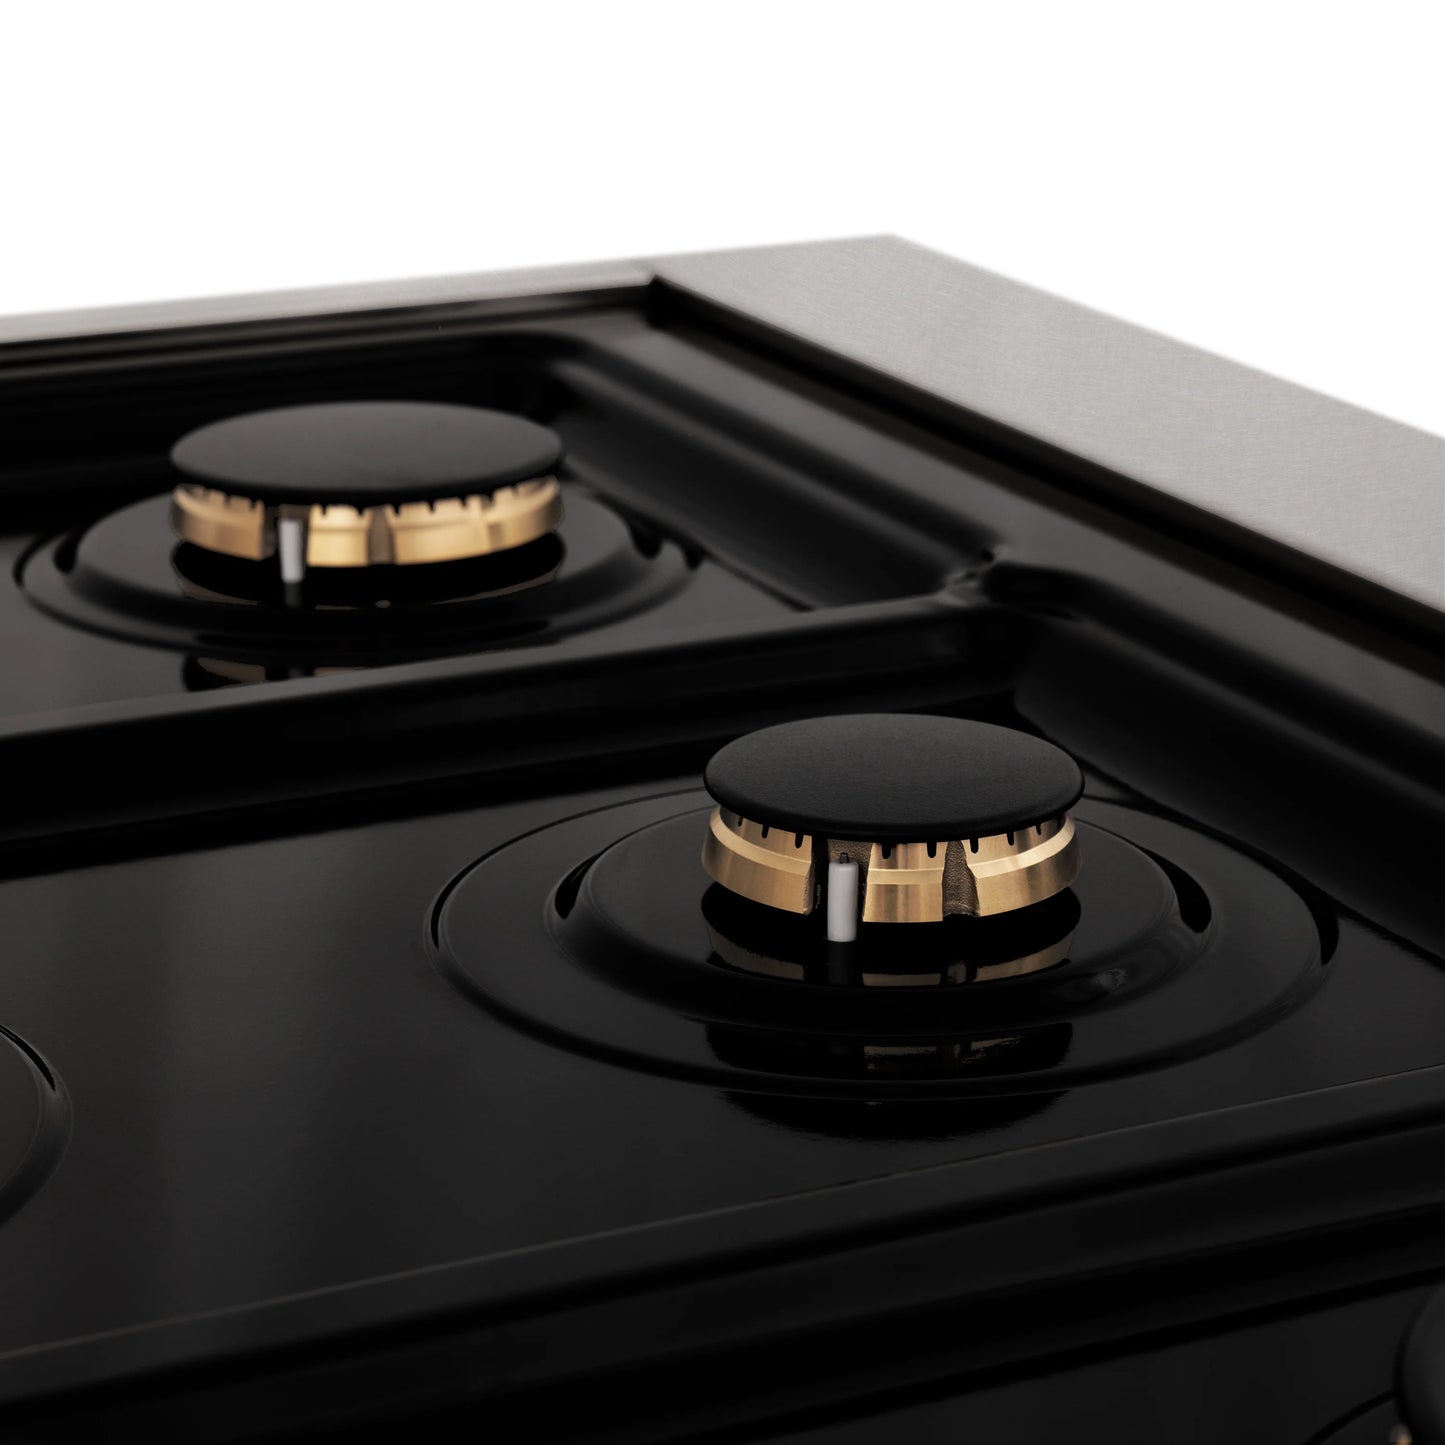 ZLINE 36 in. Dual Fuel Range with Gas Stove and Electric Oven in All Fingerprint Resistant Stainless Steel with Brass Burners (RAS-SN-BR-36)